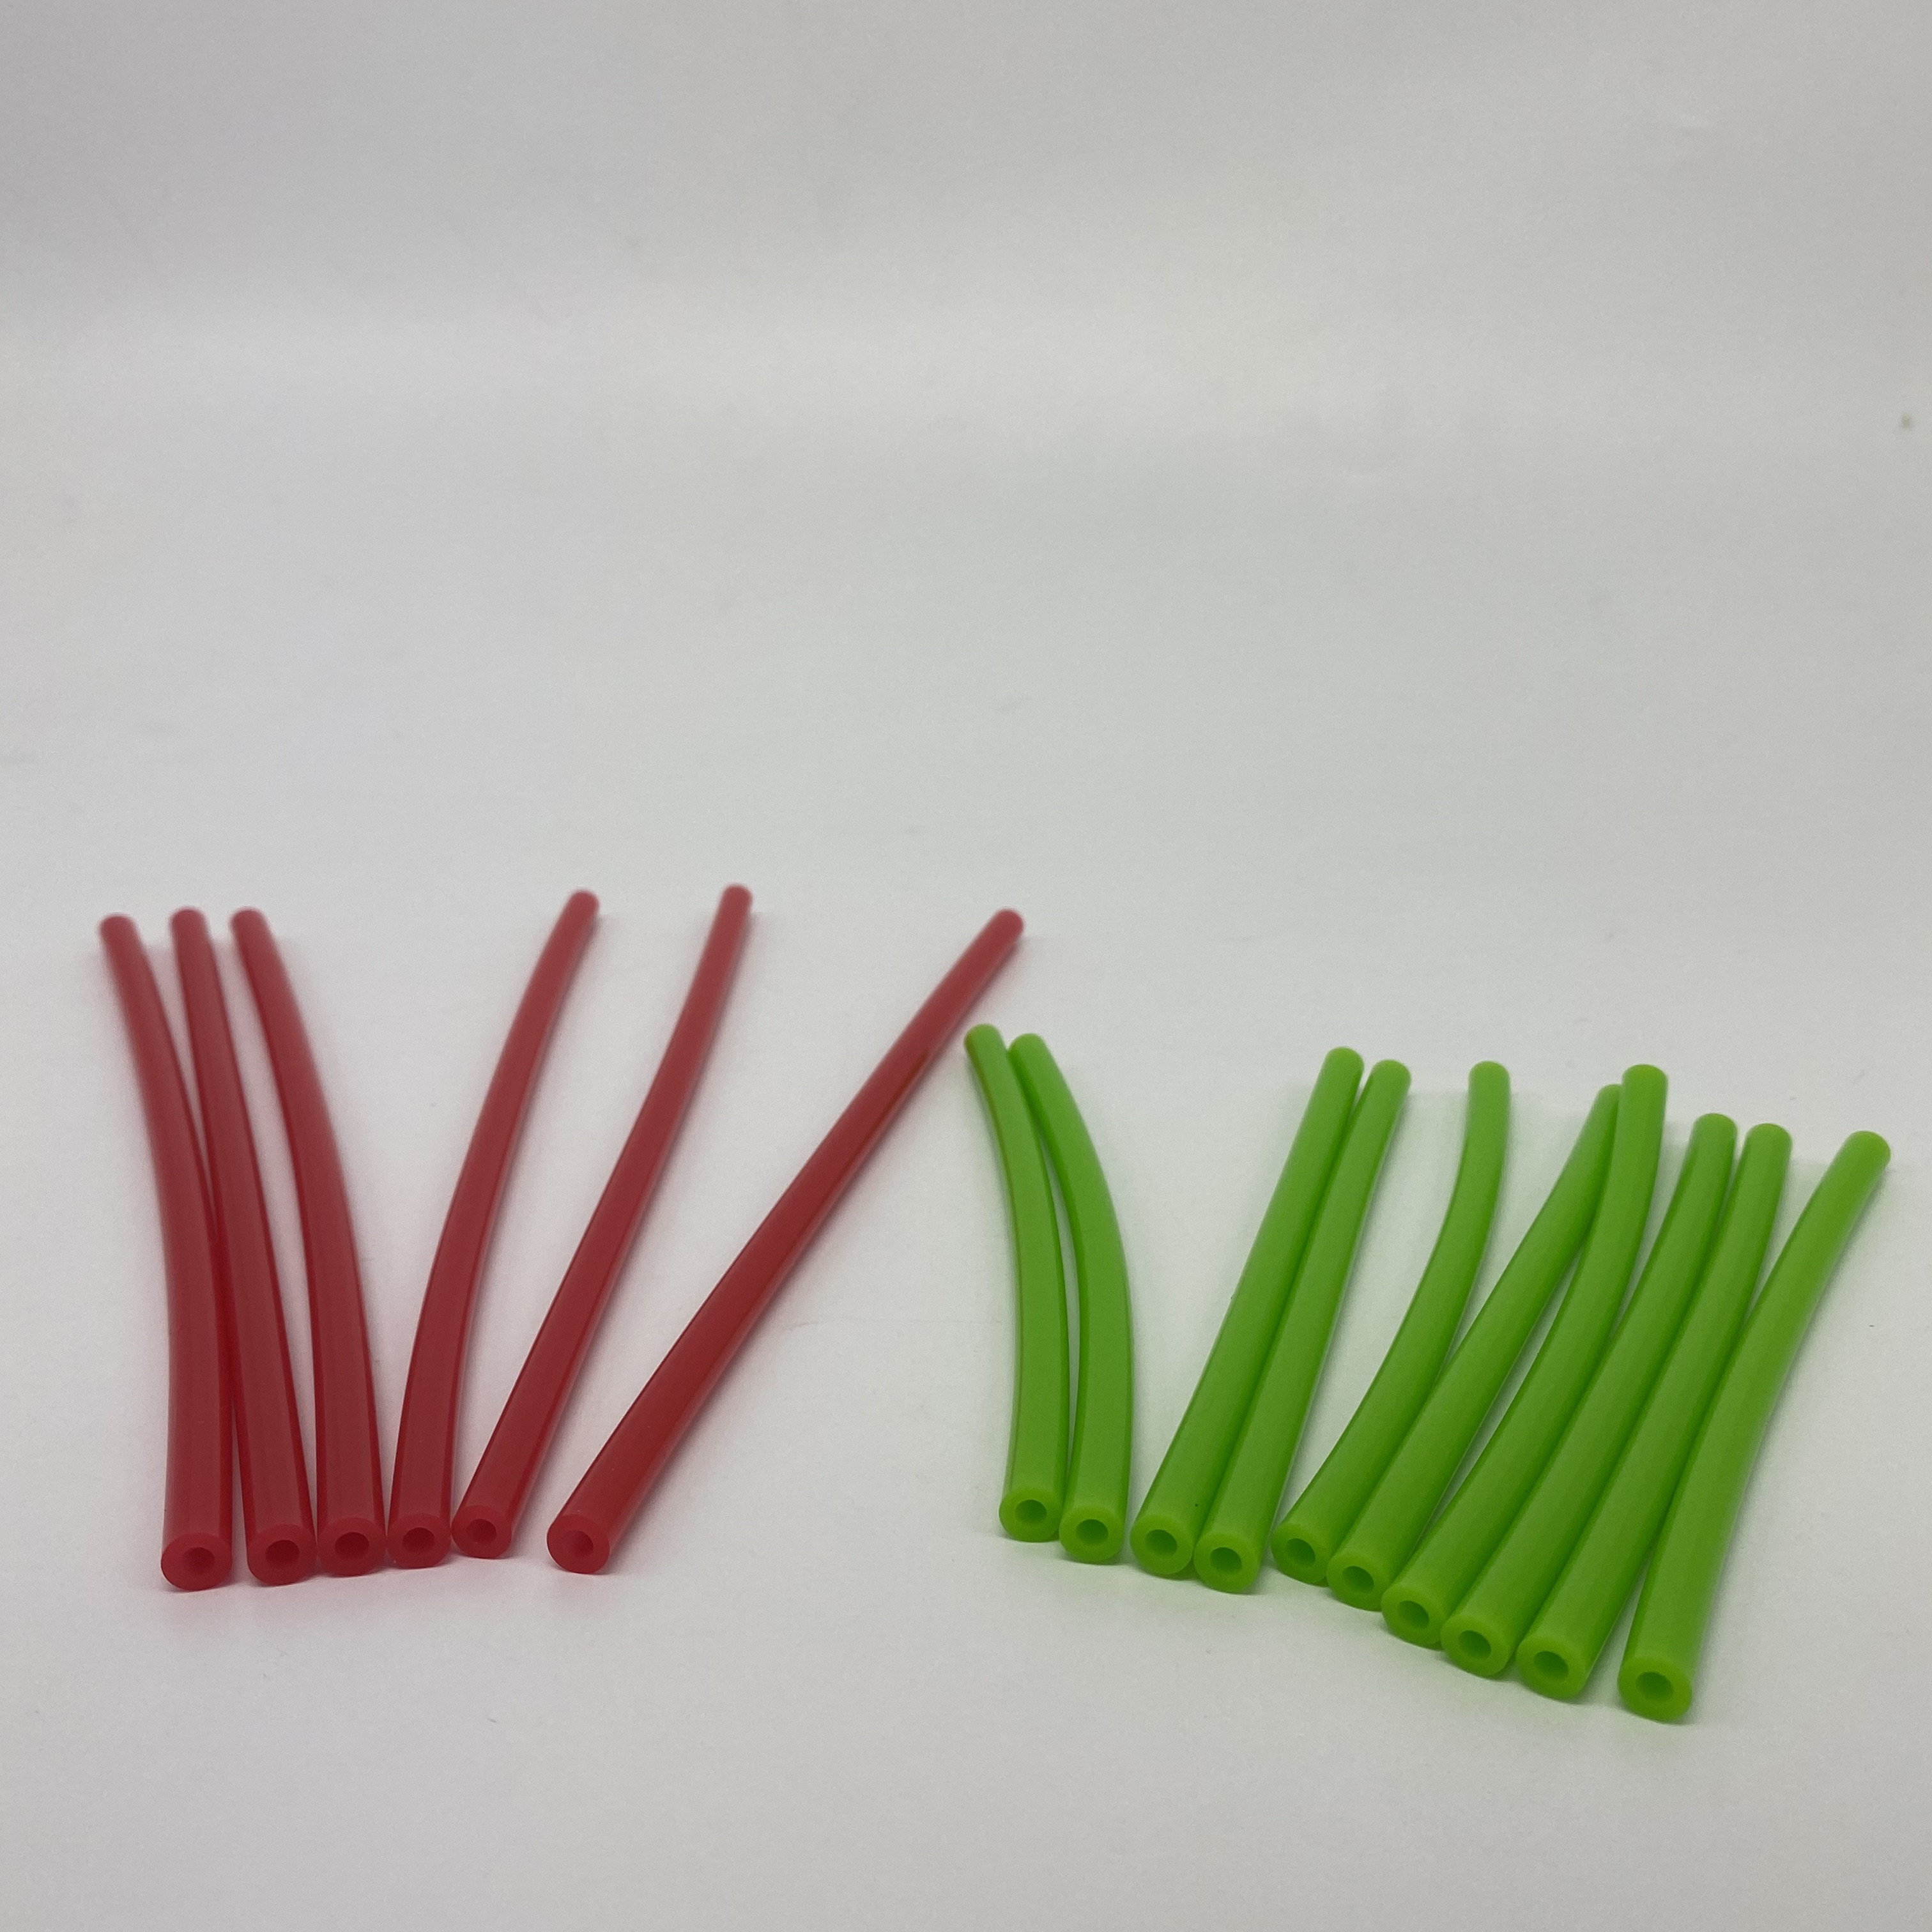 Support Custom Diemeter Food Grade Silicone Recycled Hose